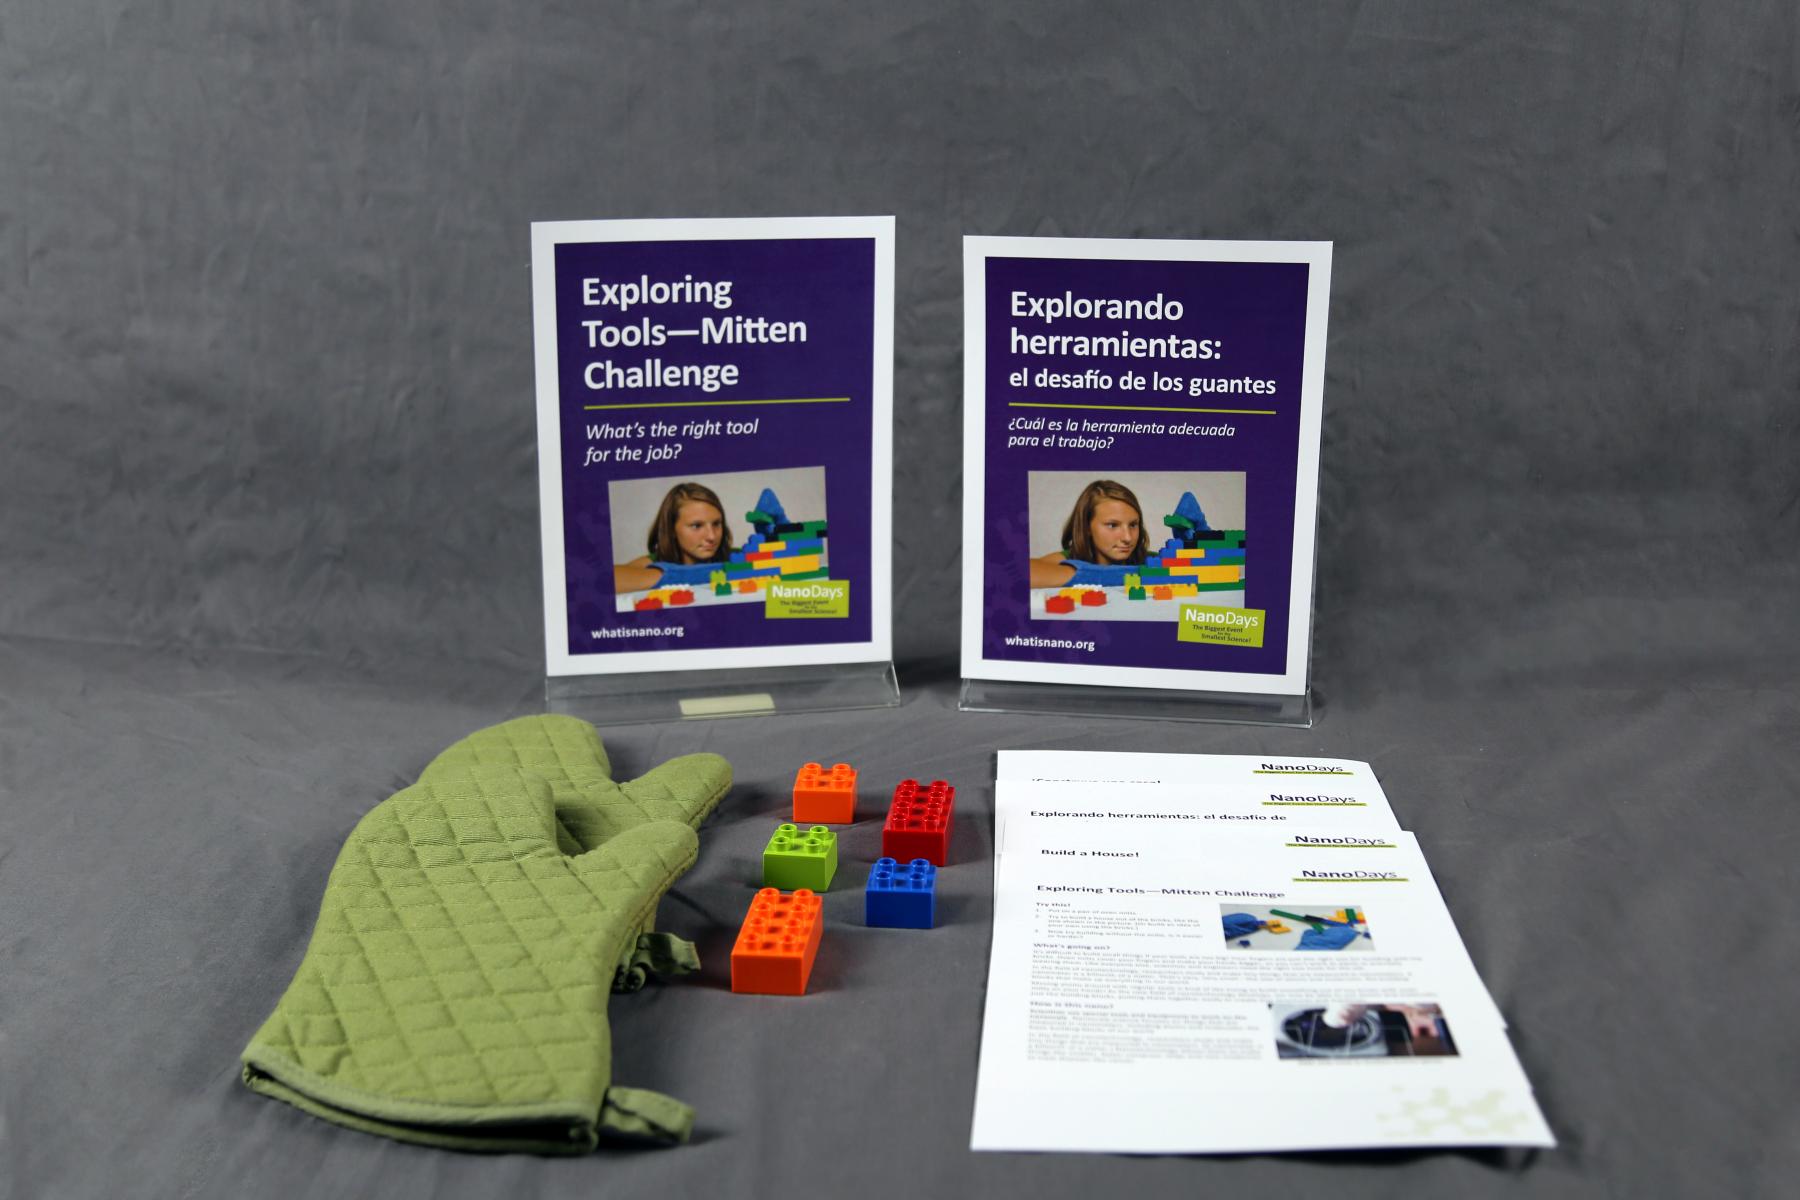 Mitten Challenge  activity components including signs, activity materials and guides.